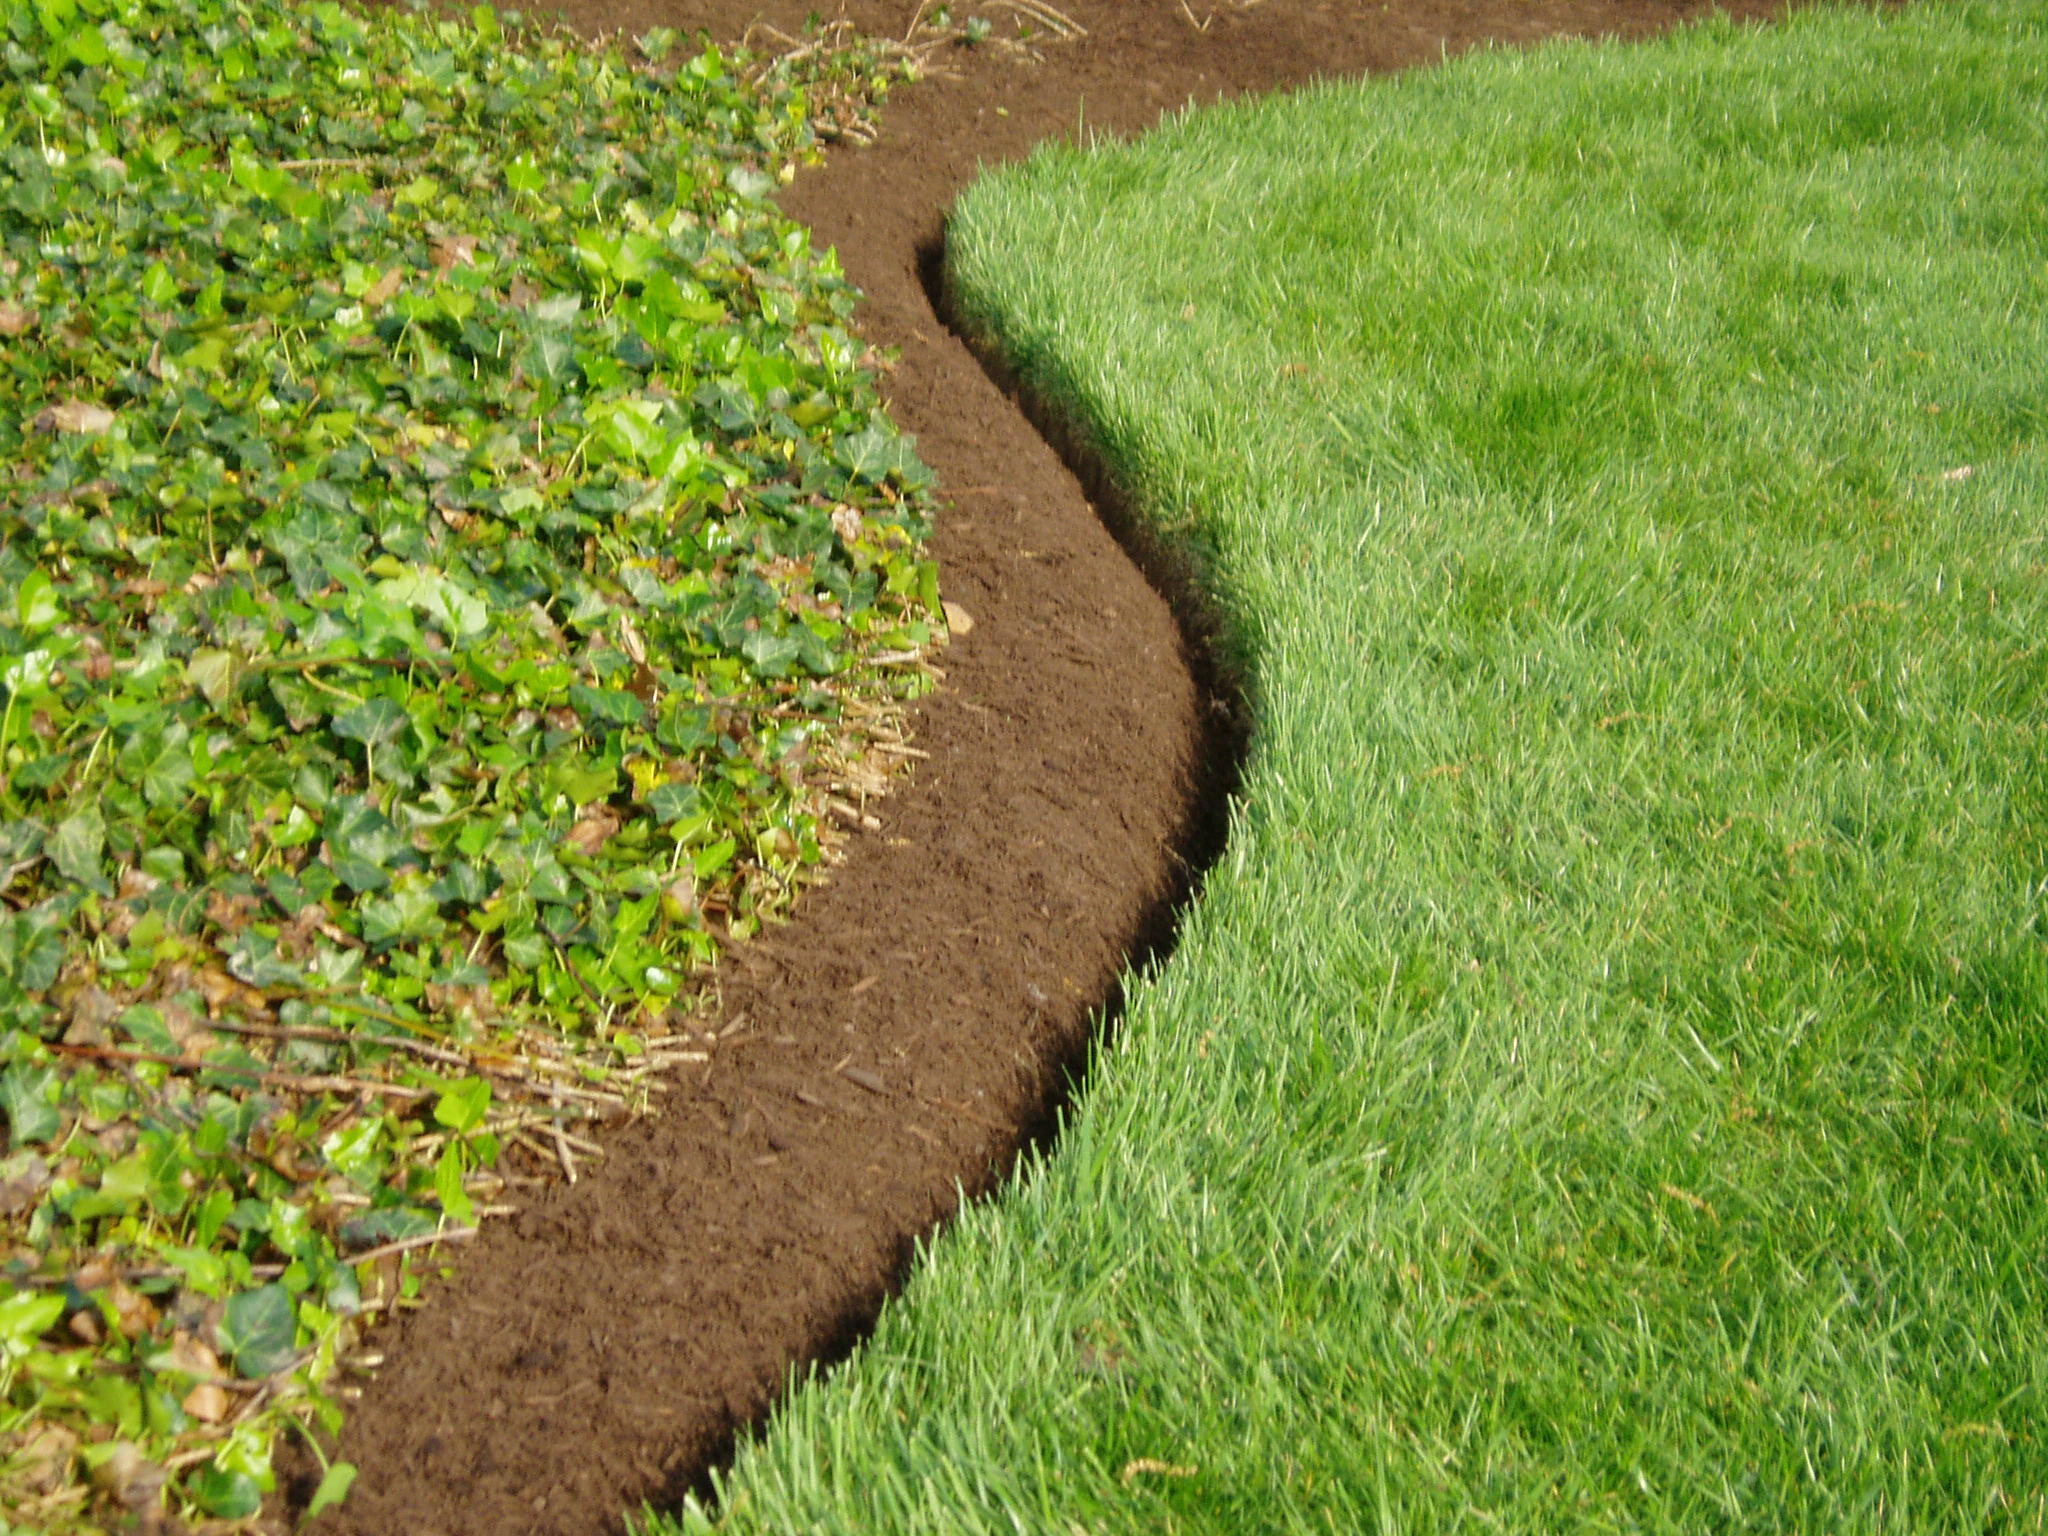 Best Landscape Edging
 The Best Landscape Edging to Install Around Your Flower